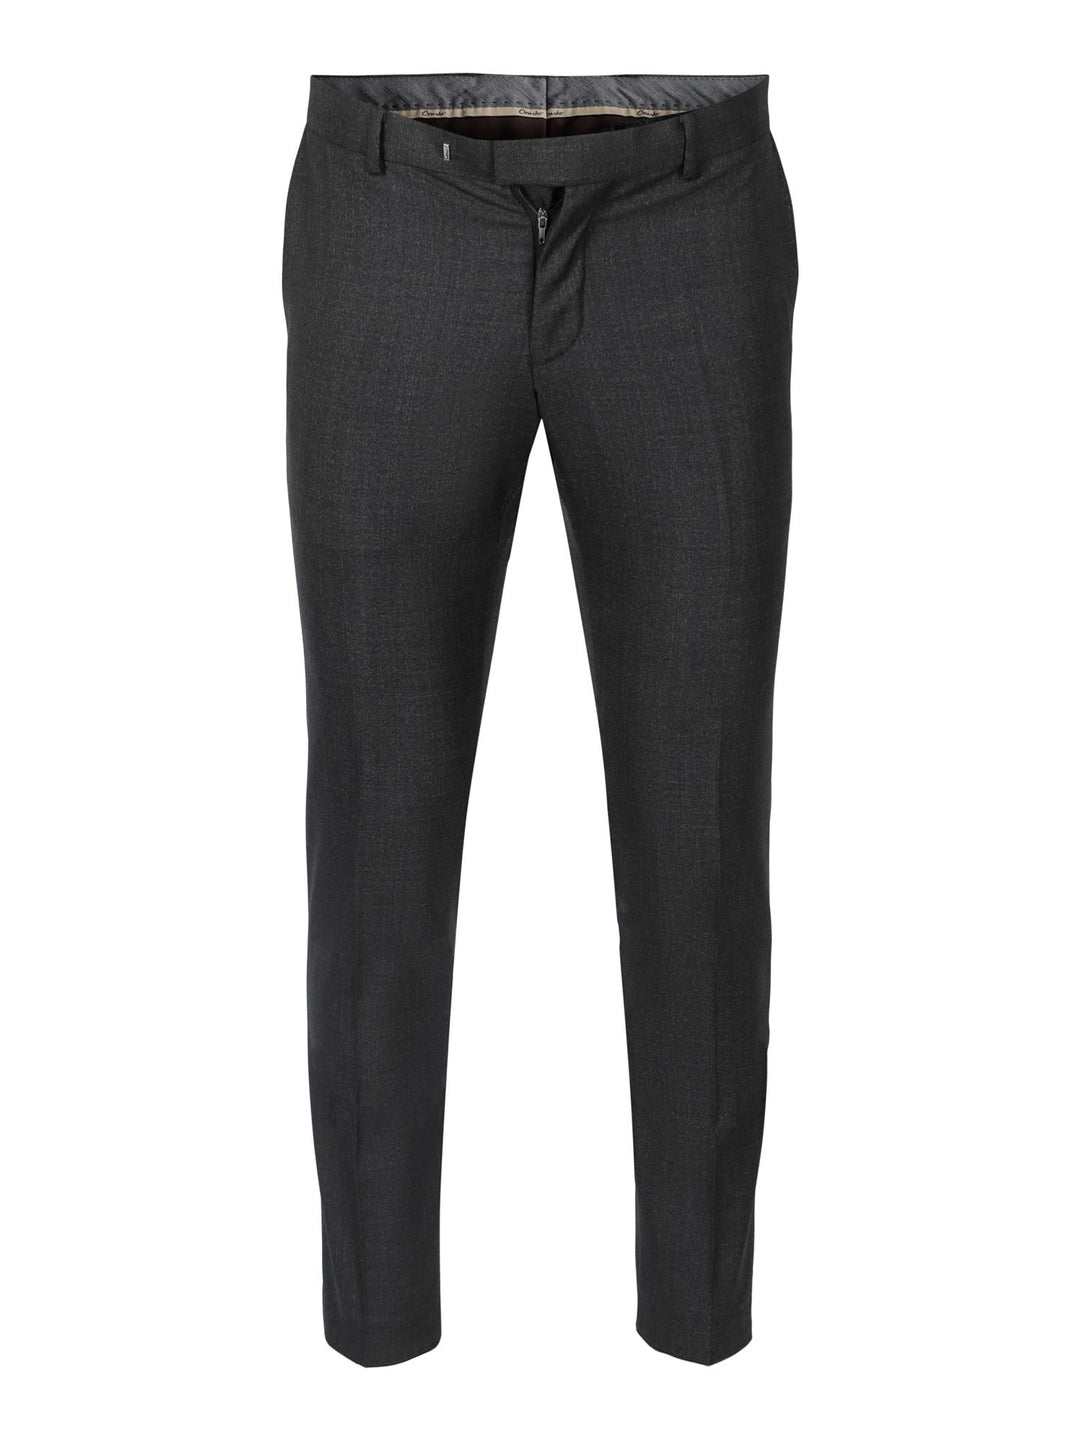 Palermo Trousers Charcoal